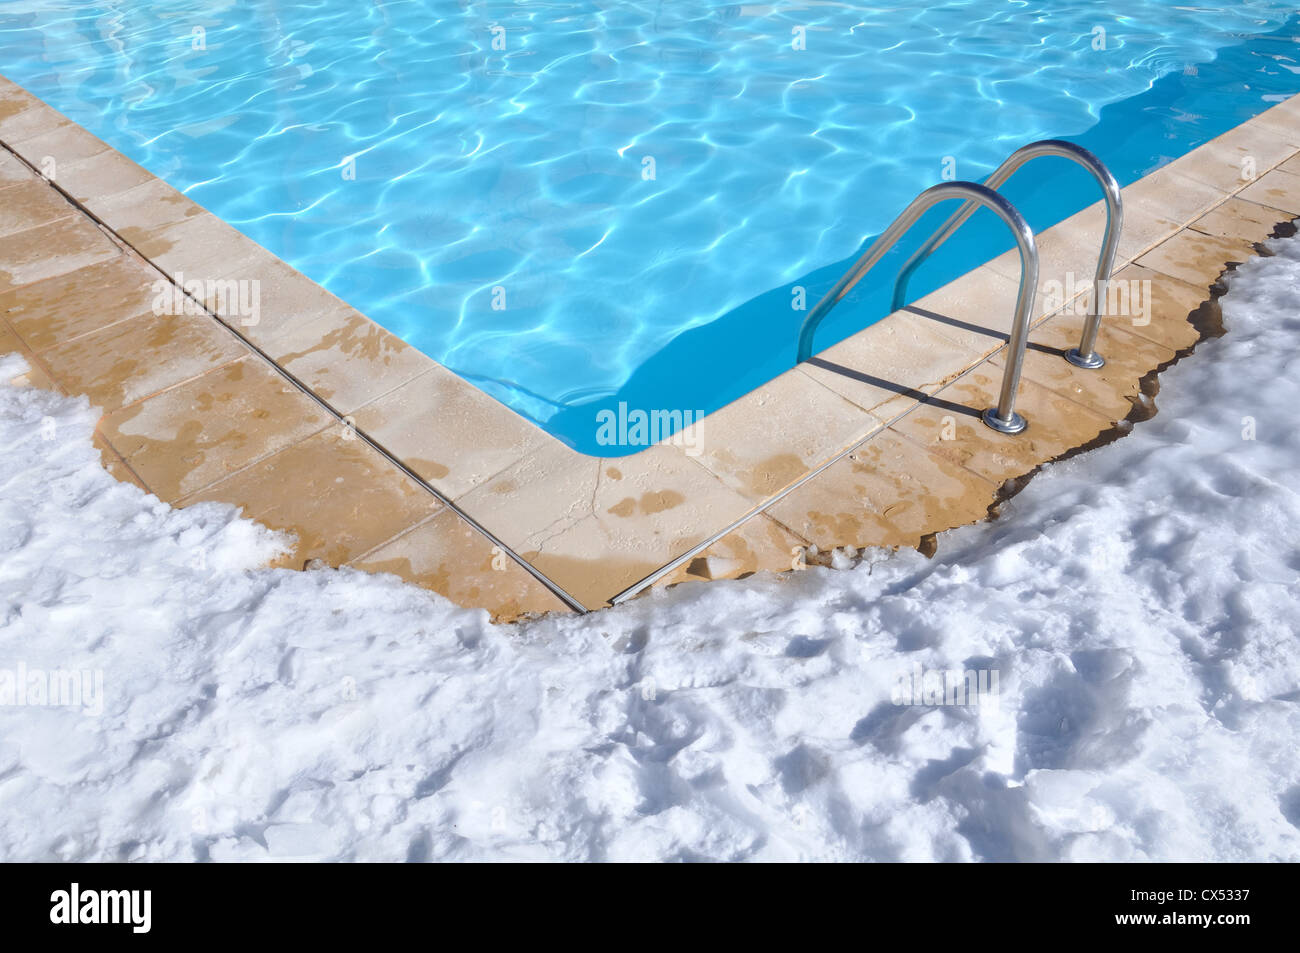 blue water of a swimming pool with outdoor terrace covered in snow Stock Photo